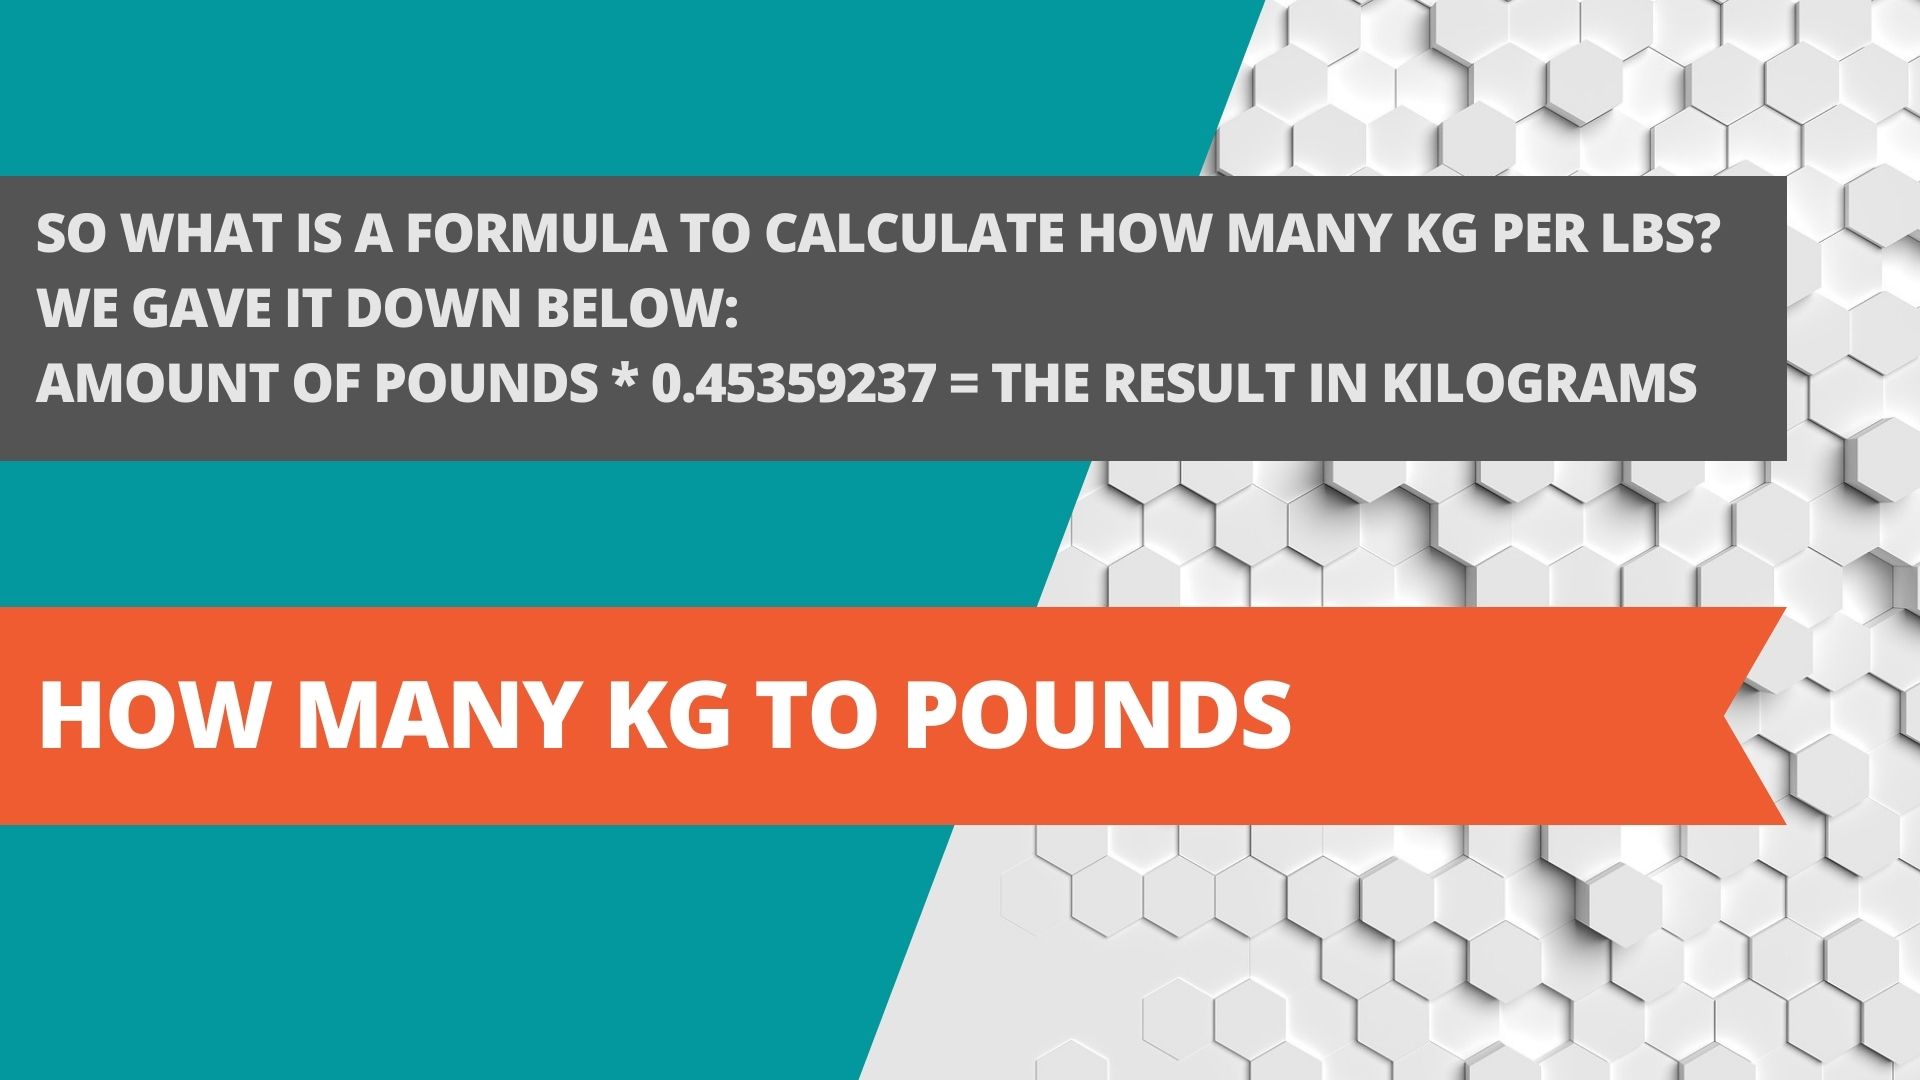 How many kg to pounds